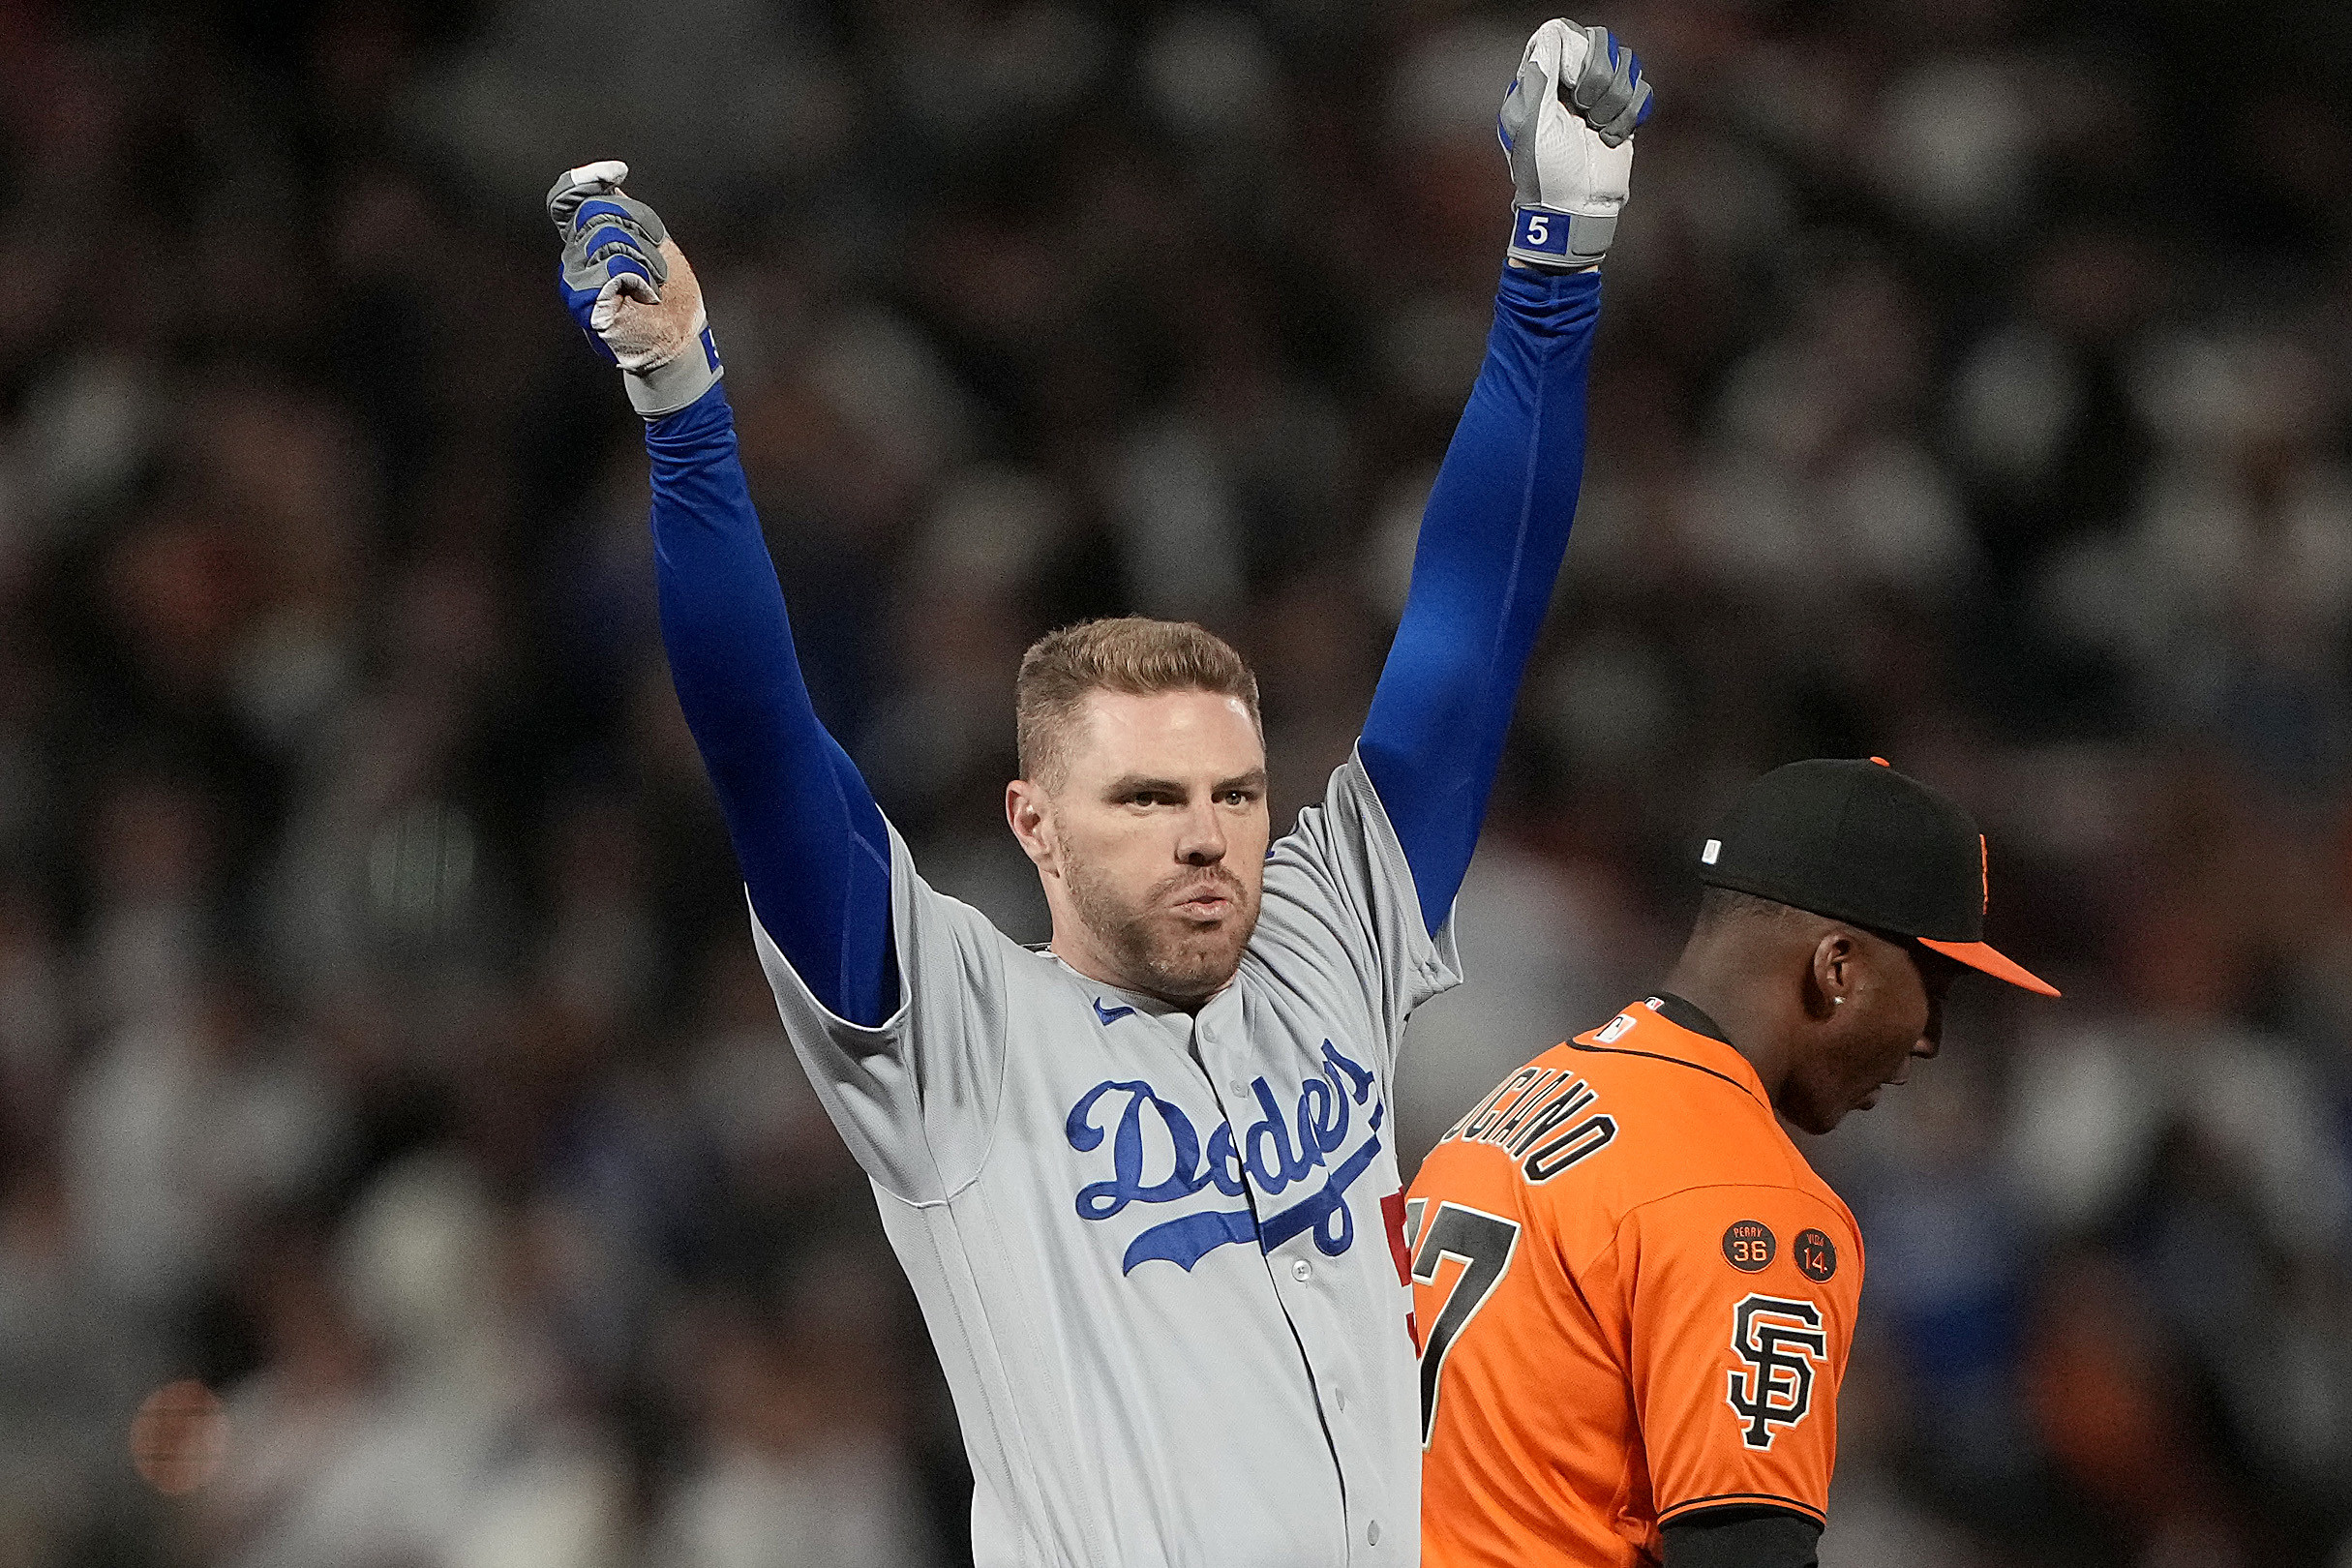 San Francisco Giants in Los Angeles Dodgers jerseys - McCovey Chronicles